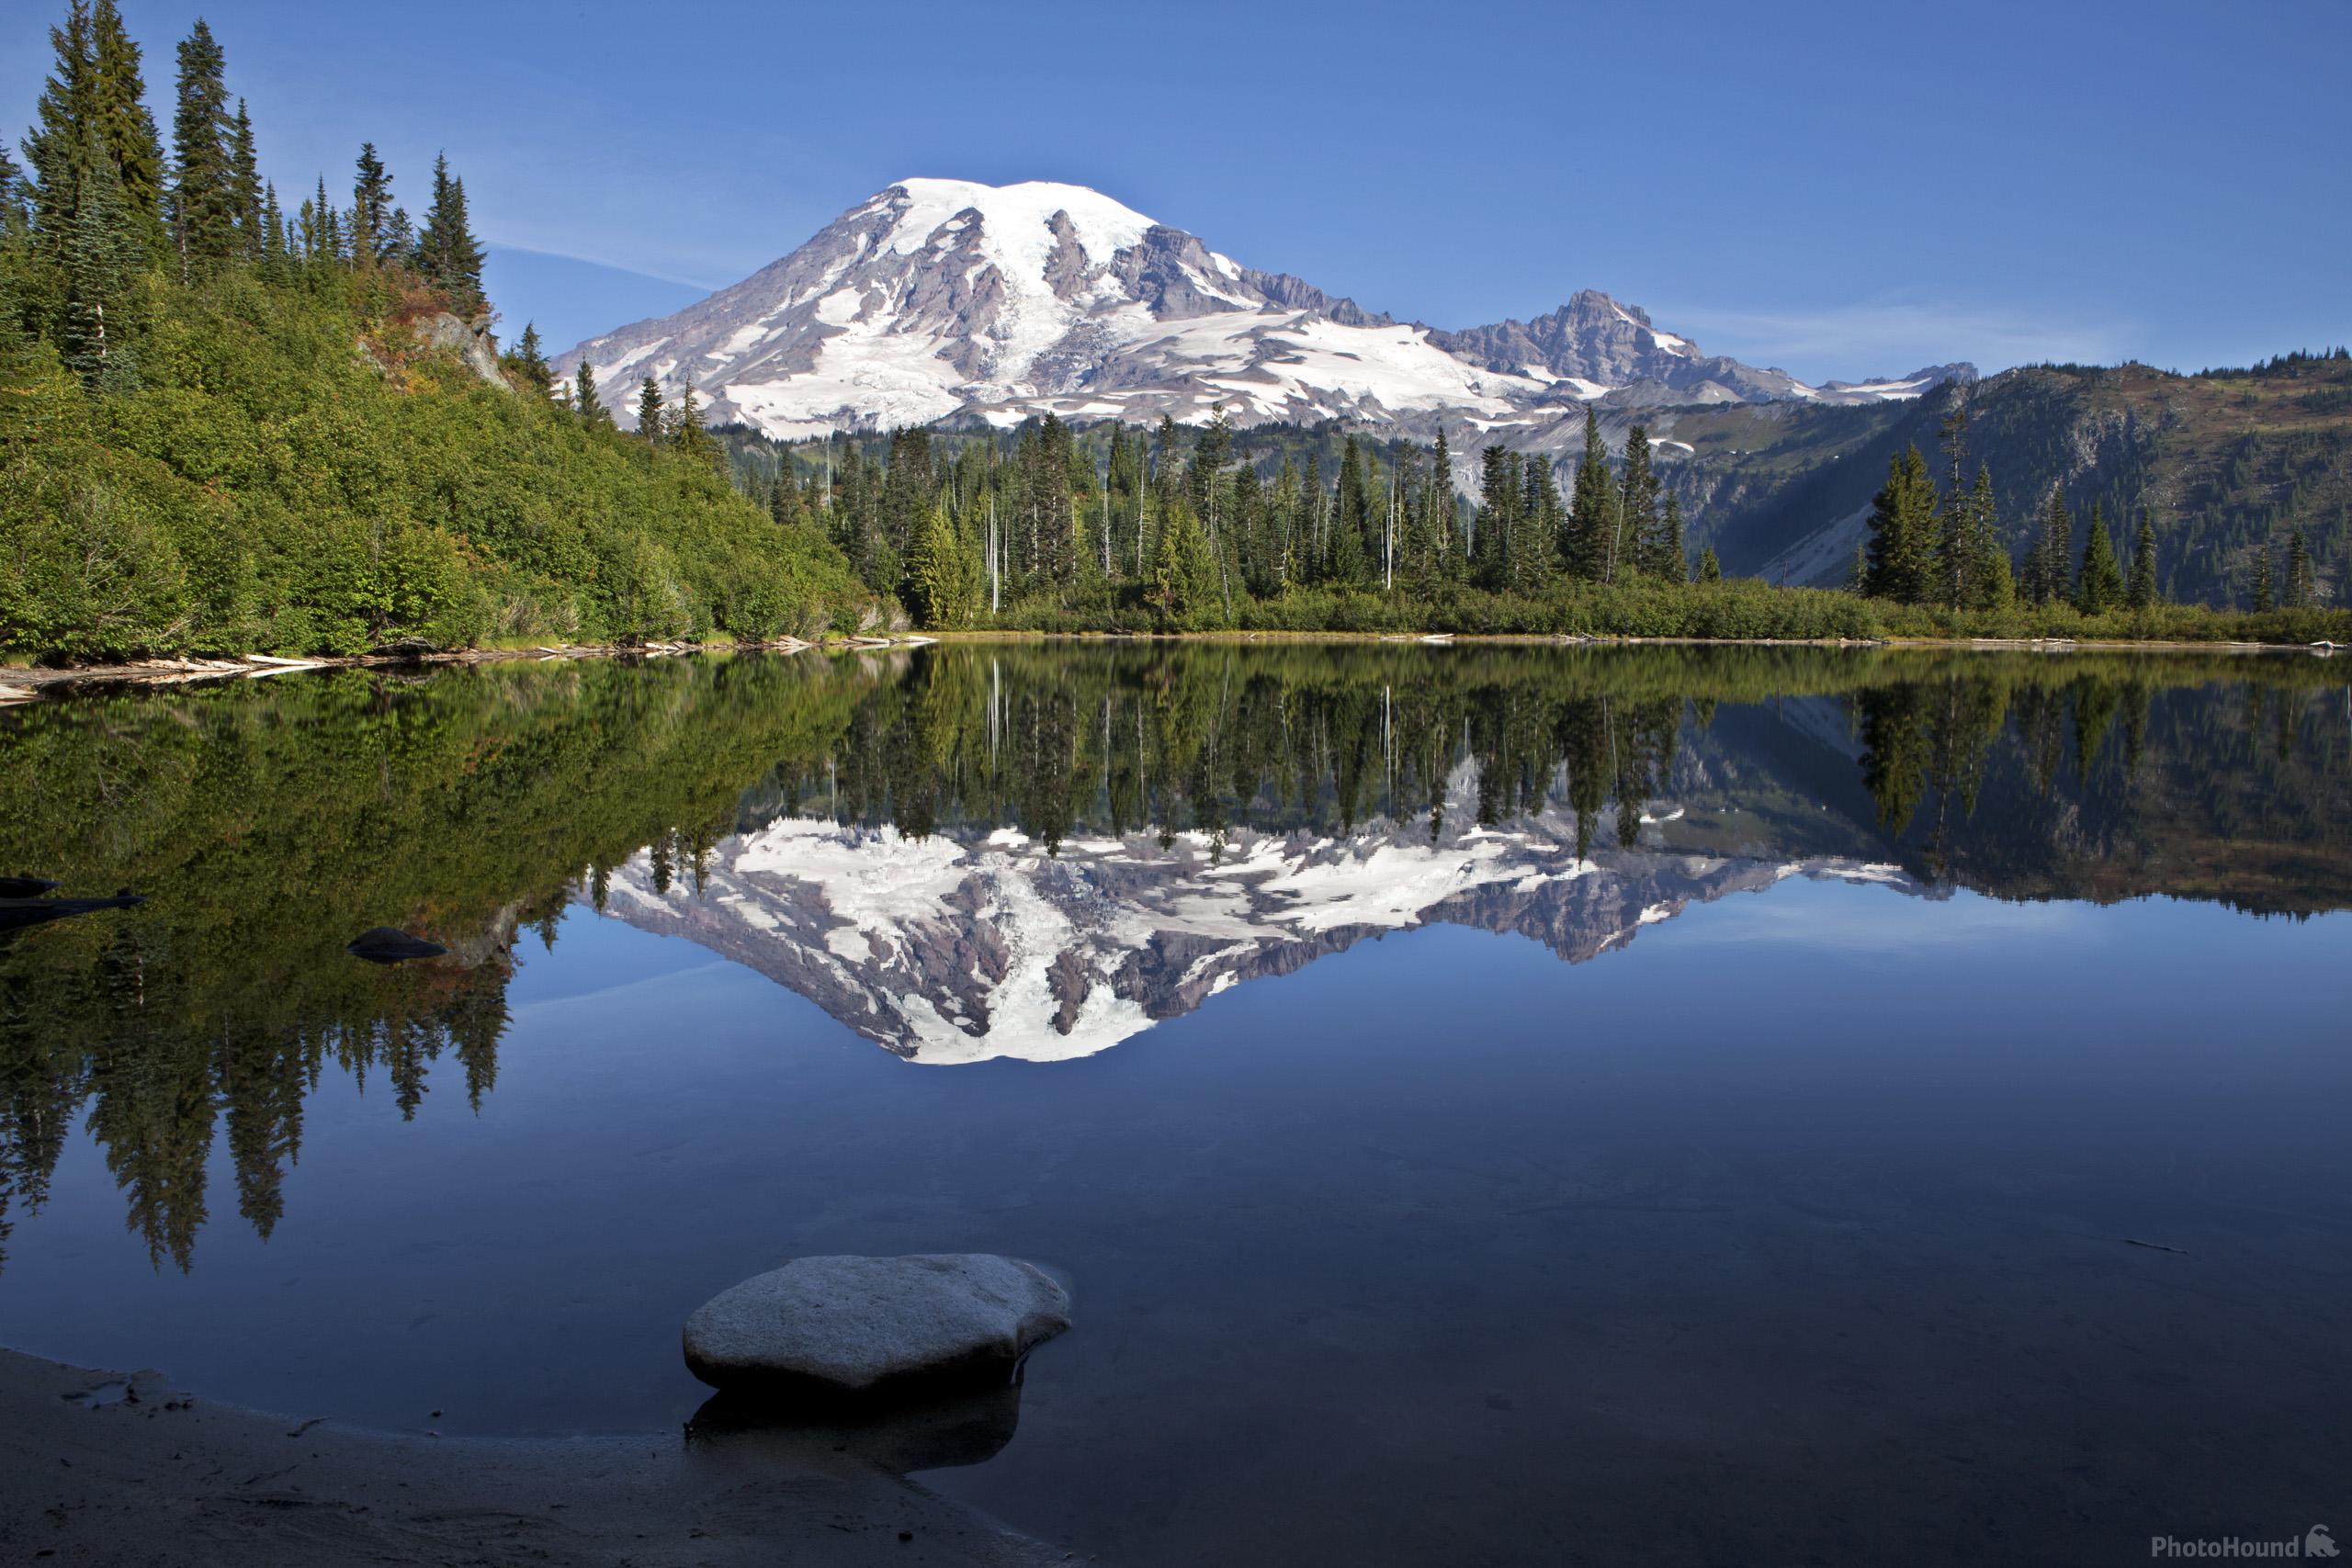 Image of Bench Lake, Mount Rainier National Park by T. Kirkendall and V. Spring